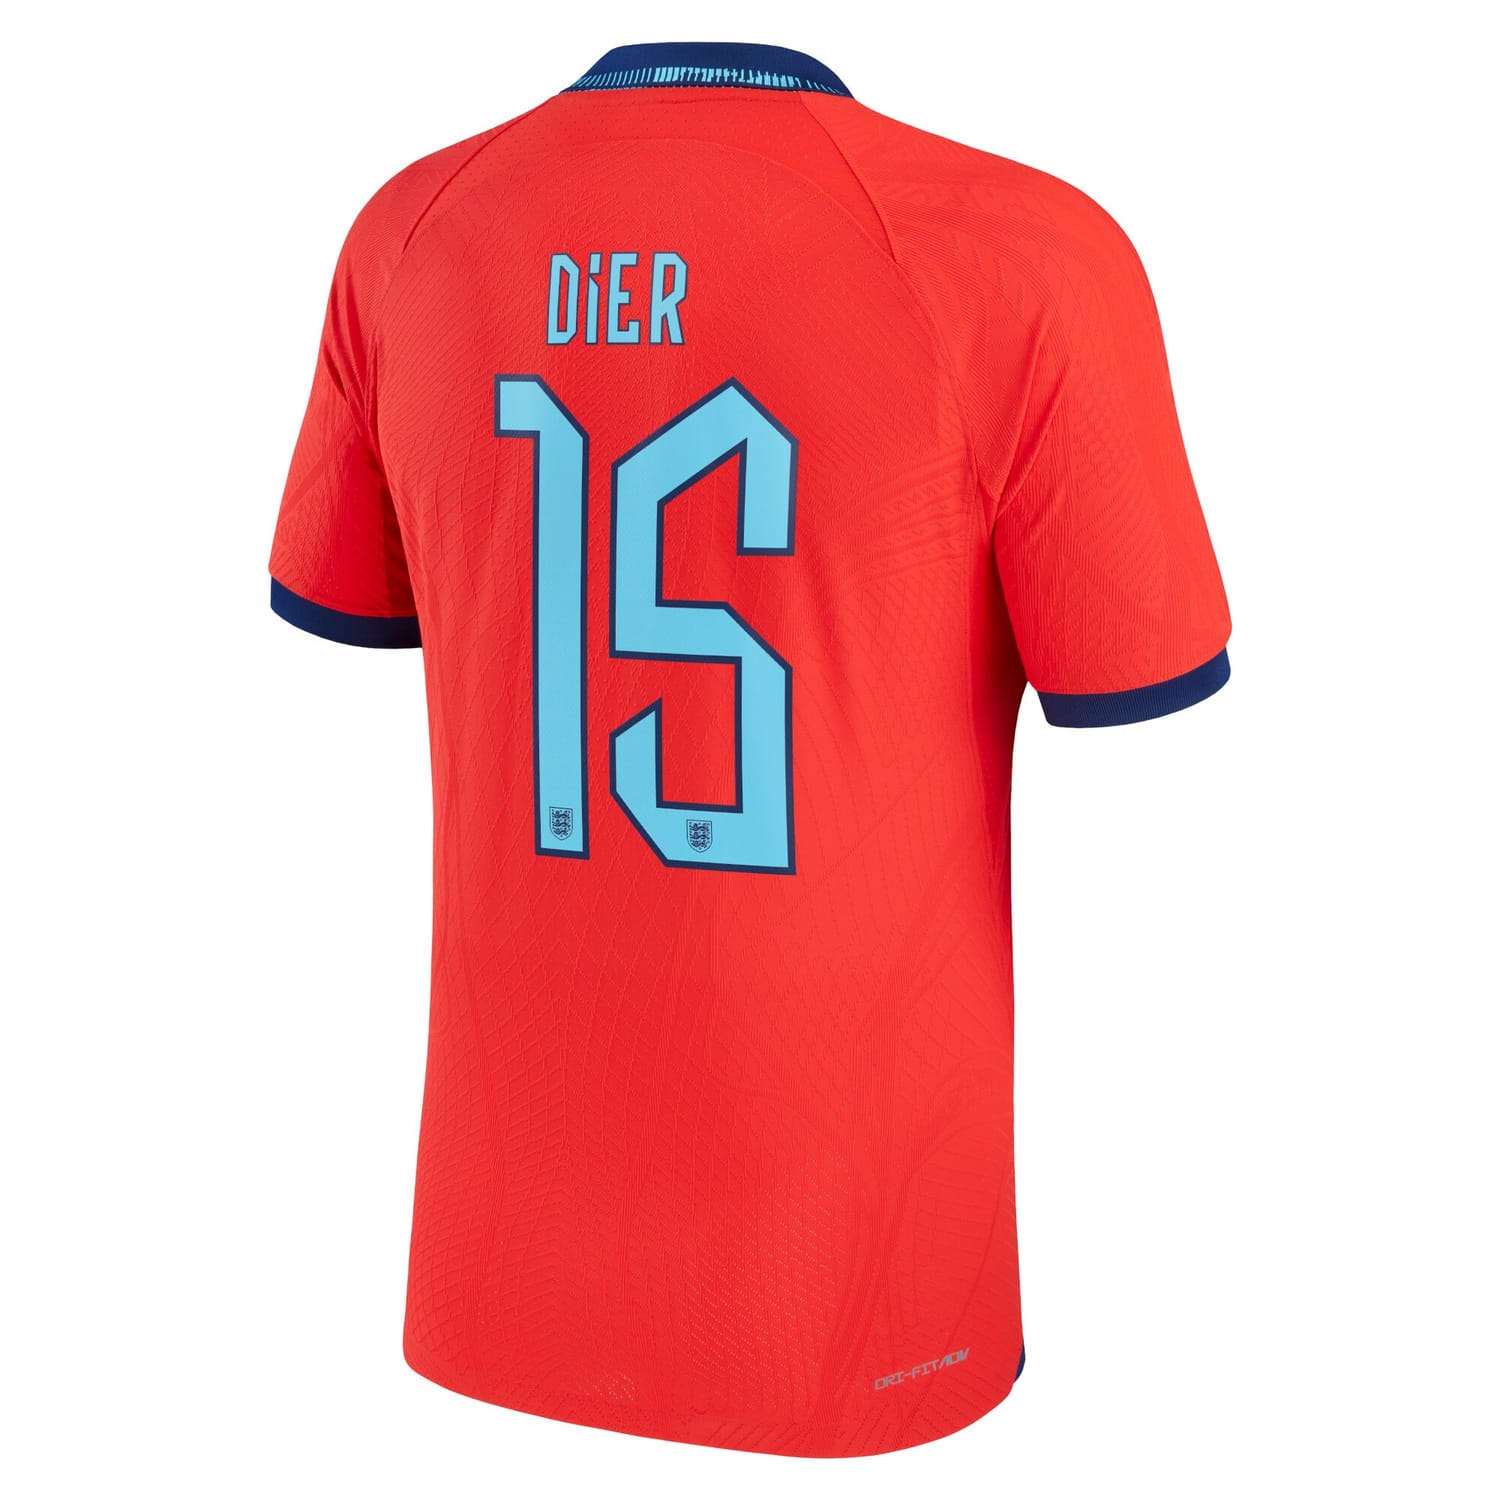 England National Team Away Authentic Jersey Shirt 2022 player Eric Dier 15 printing for Men